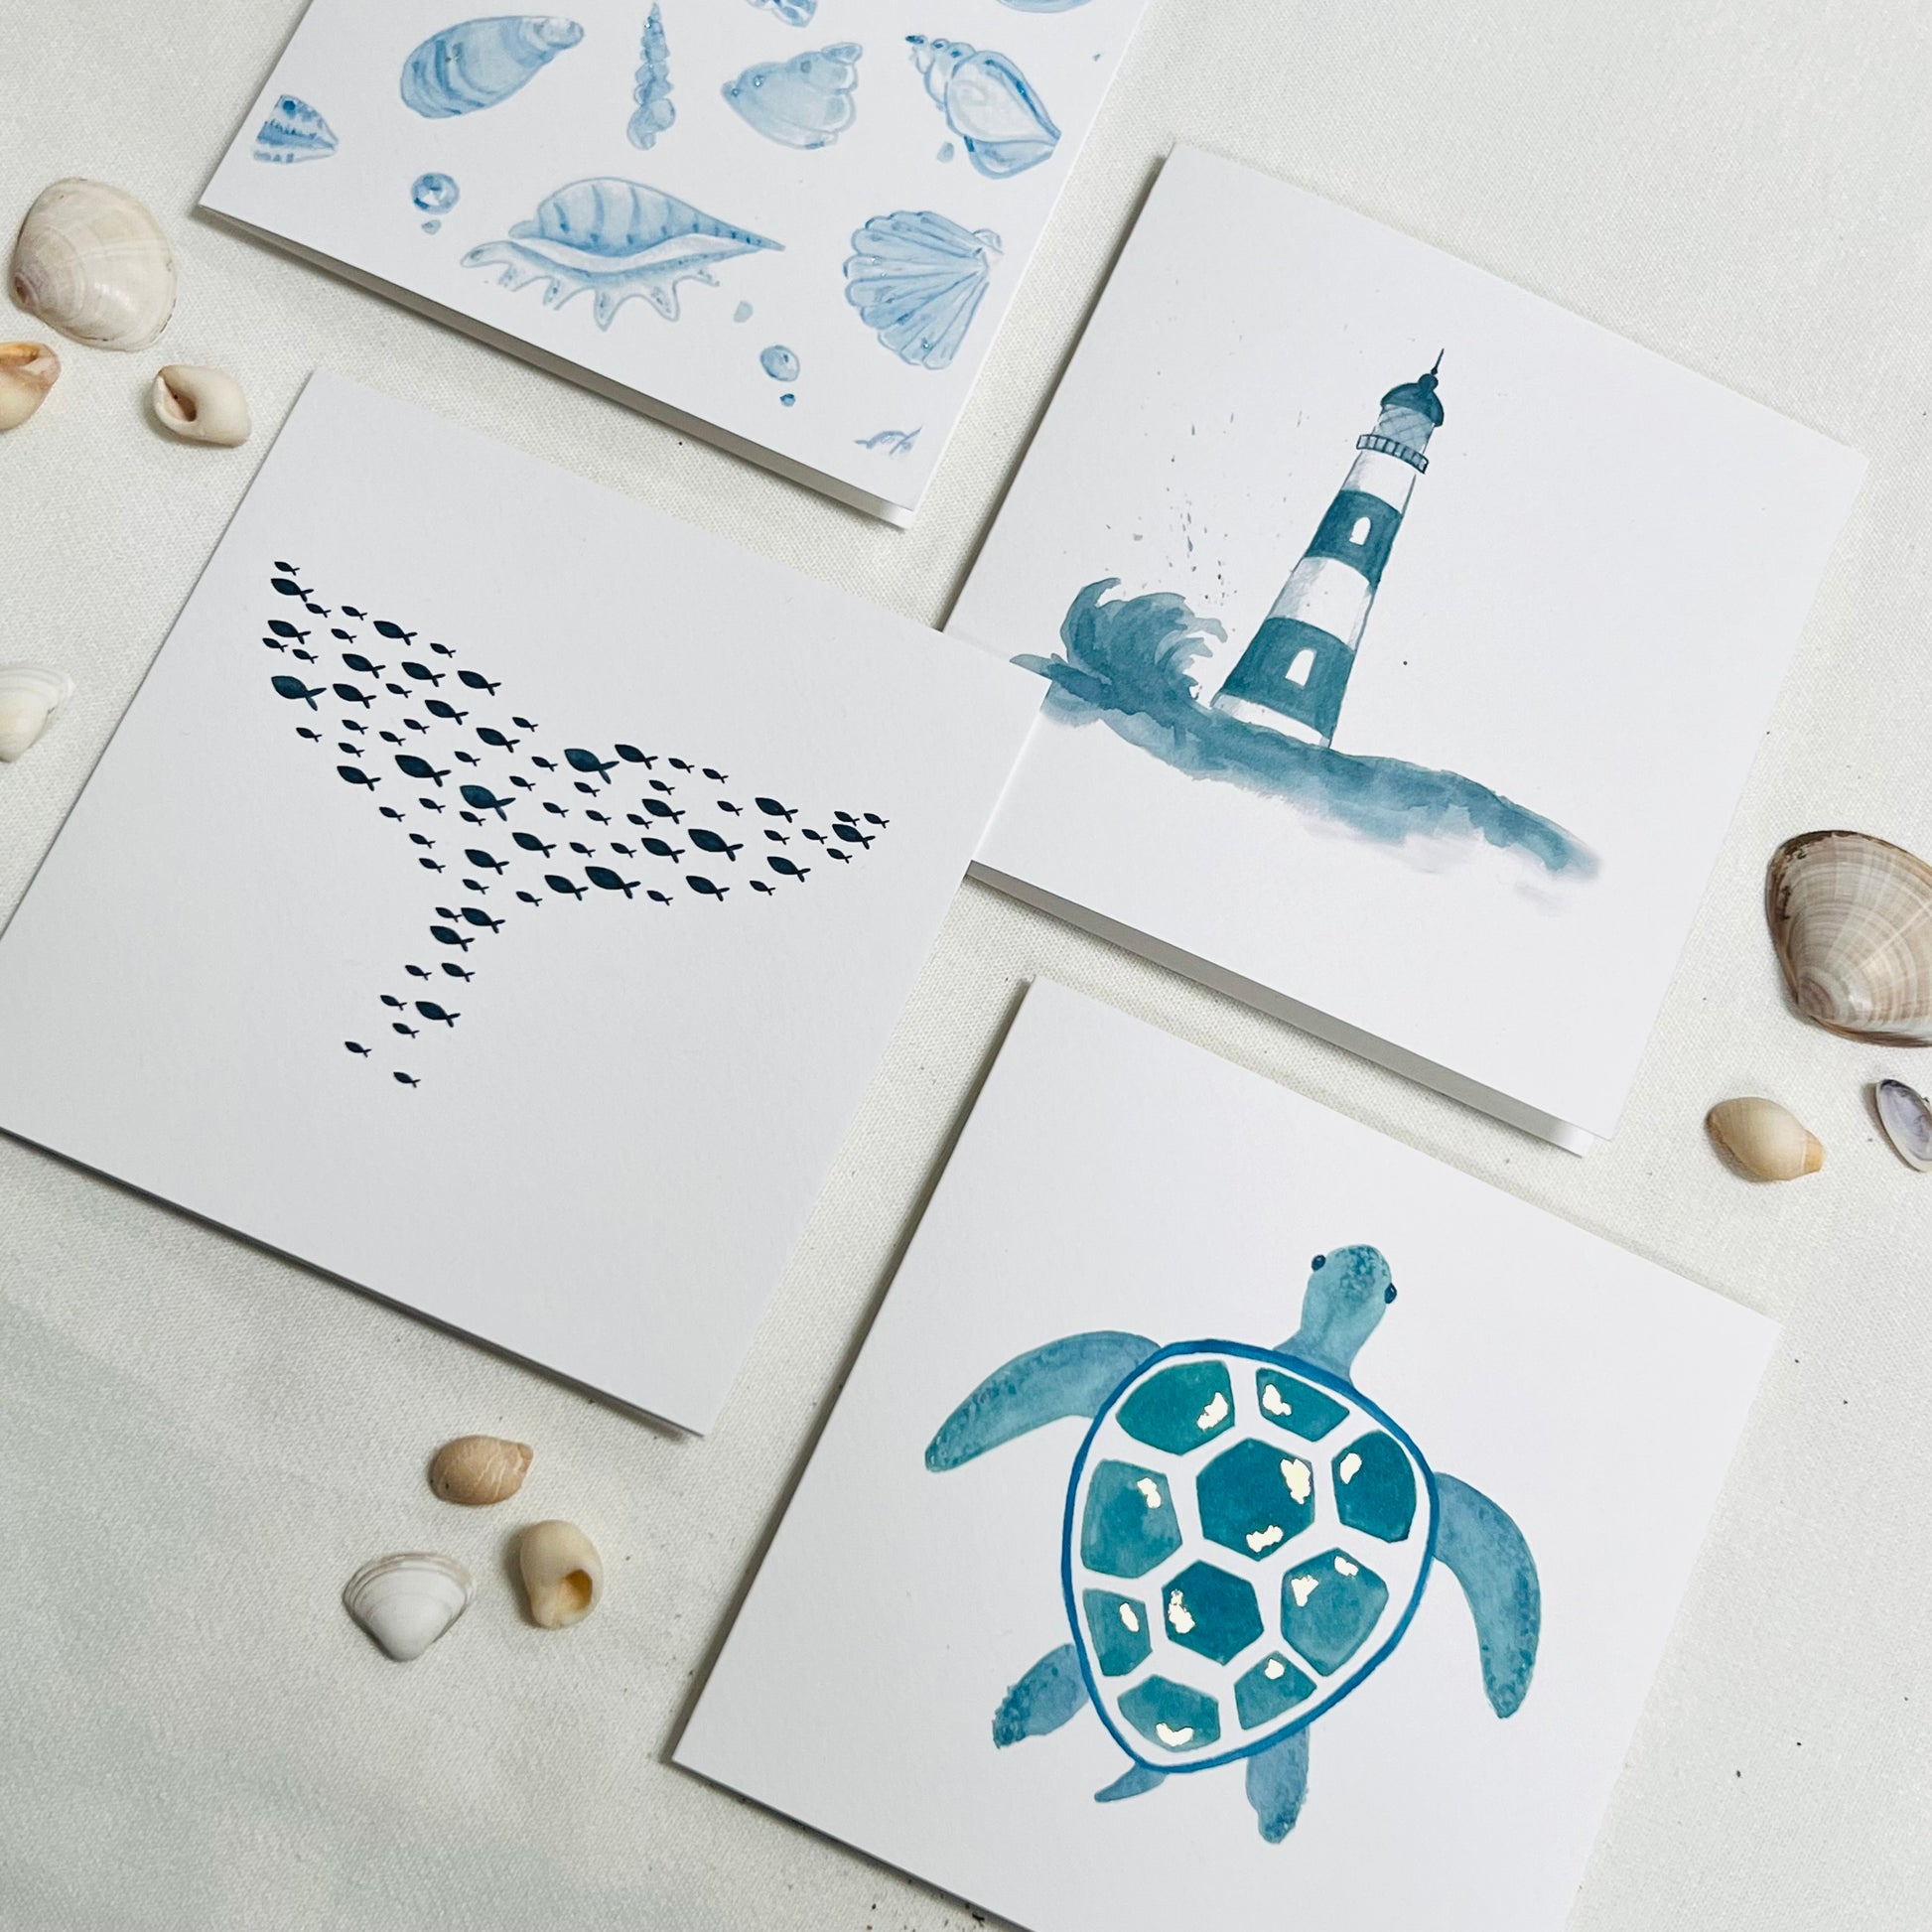 four greetings cards in a sea theme - all blue tones, sea turtles, seashells, whale, lighthouse